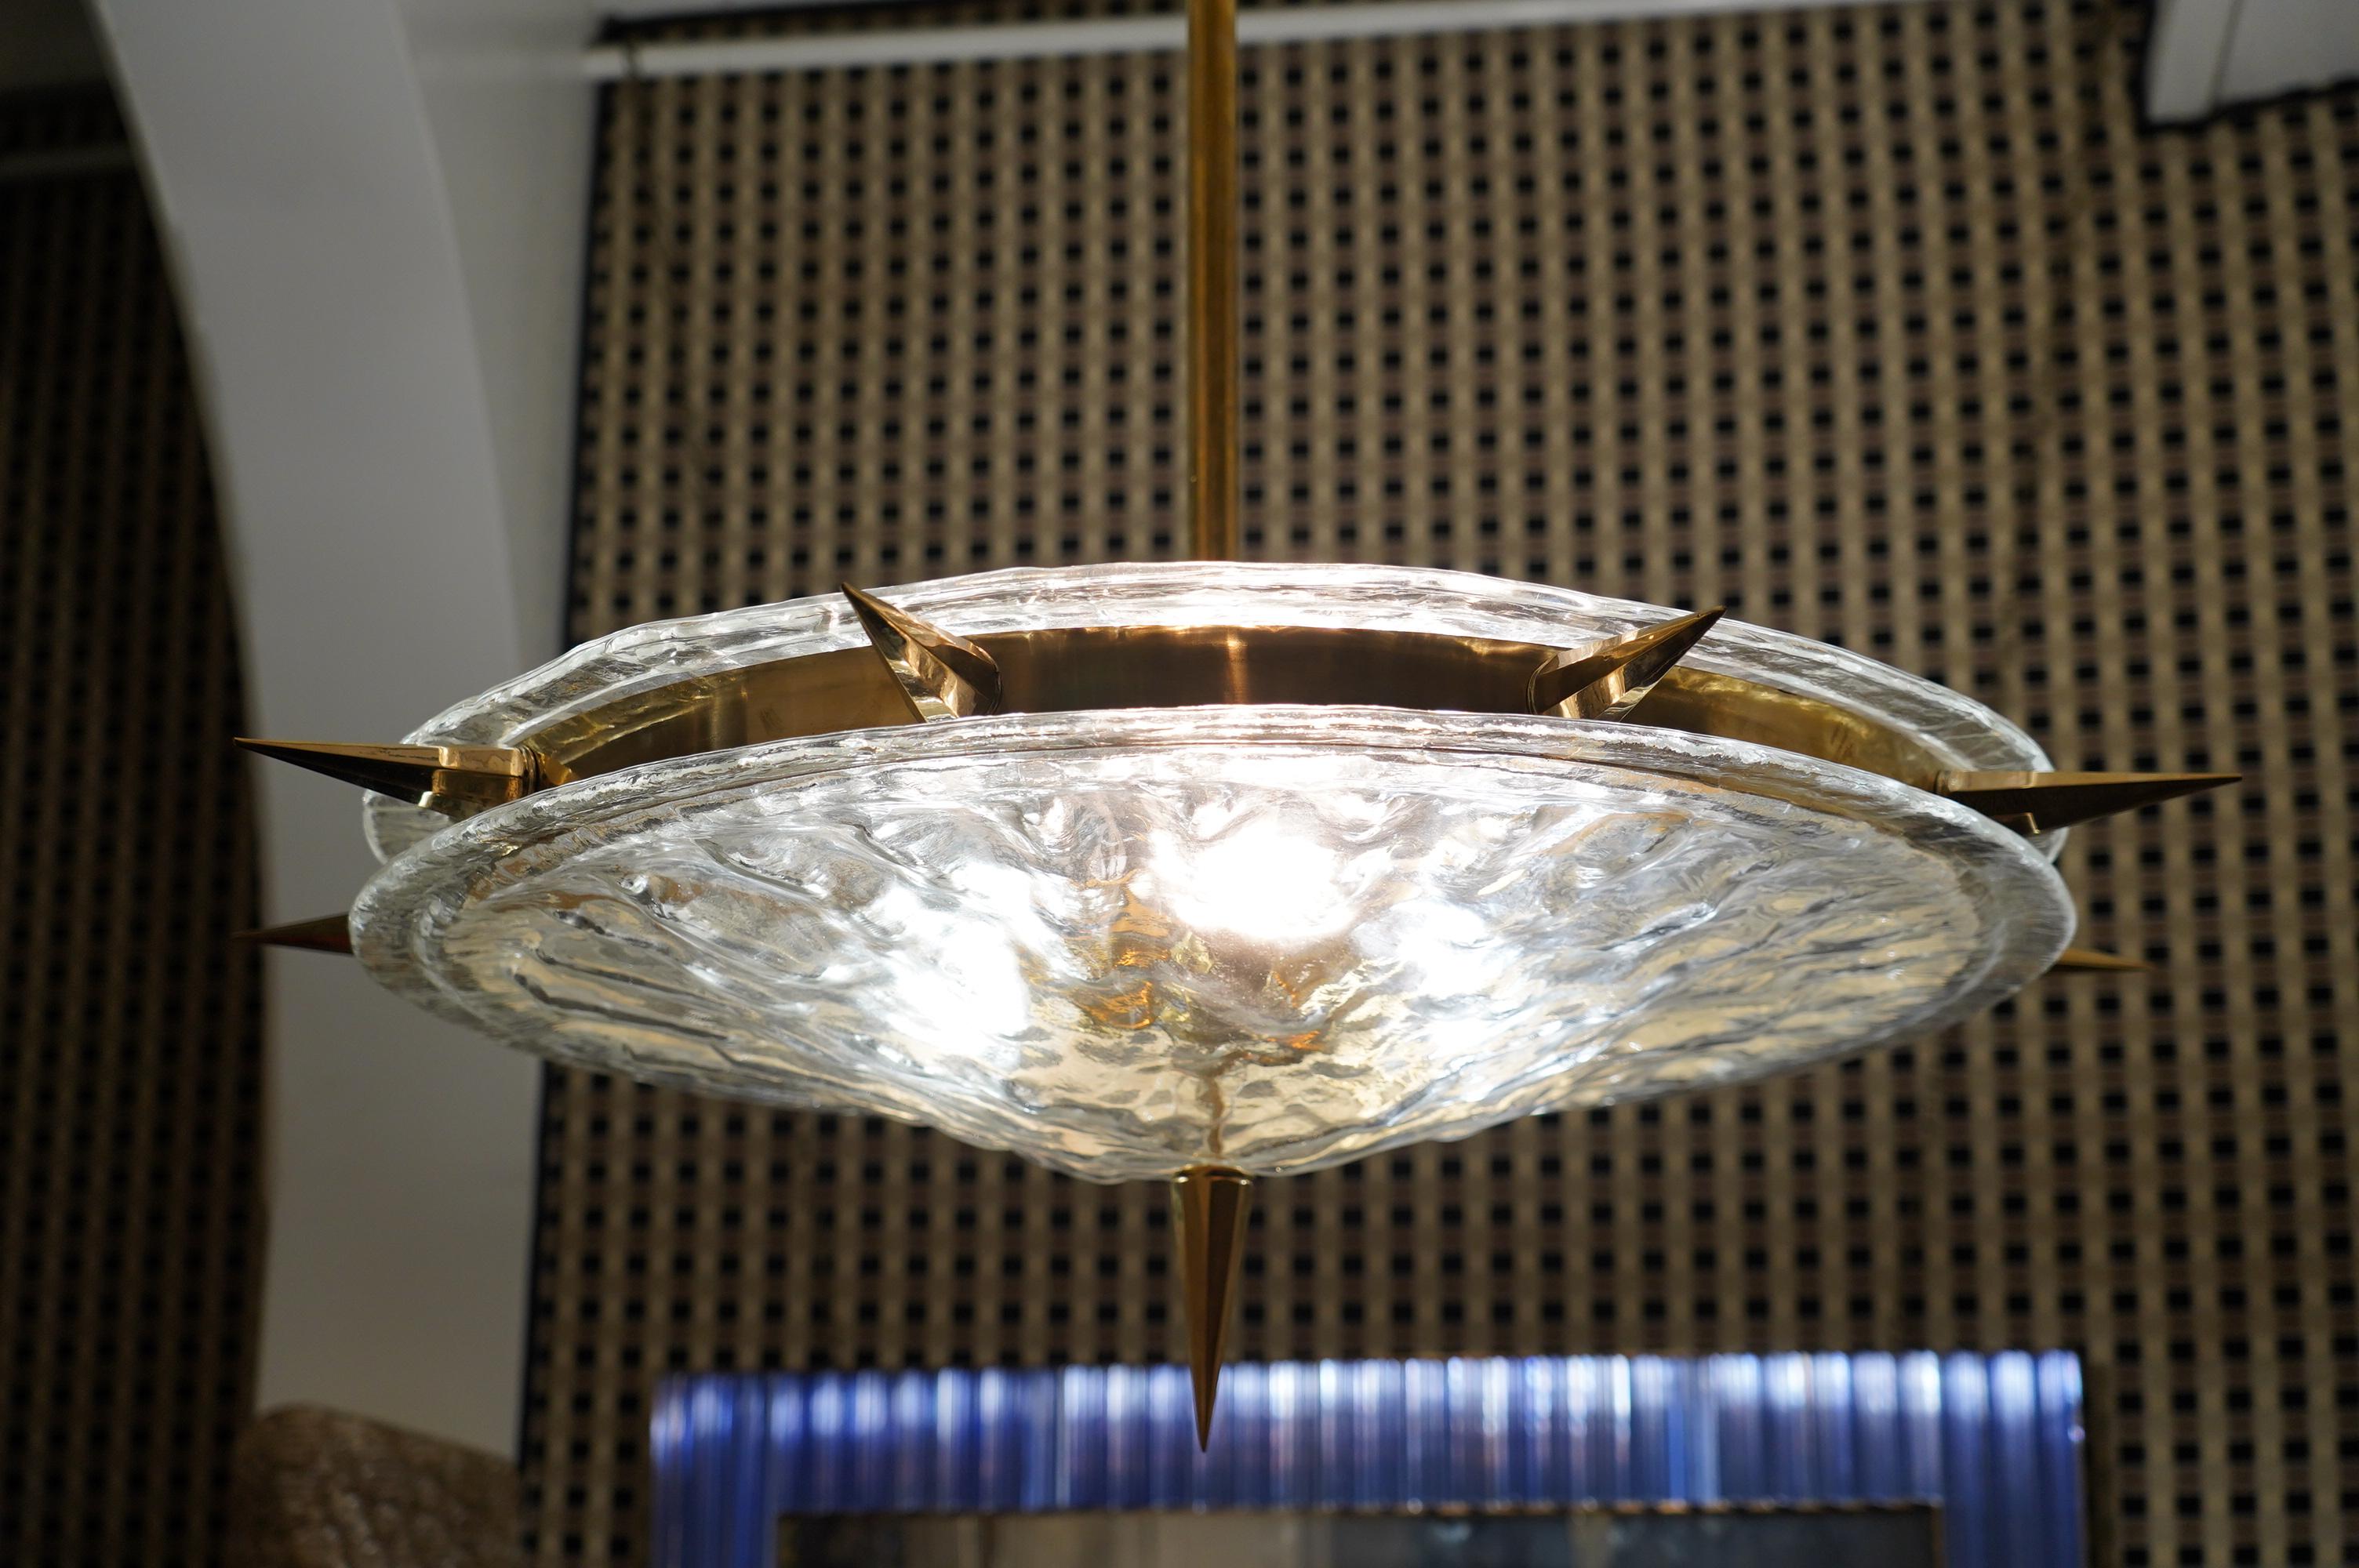 Superb chandelier for its characteristic round structure, unique design for the brass housing of the large transparent glass discs and brass castings in the shape of an inverted cone.

The chandelier has a very rare brass structure, formed by a